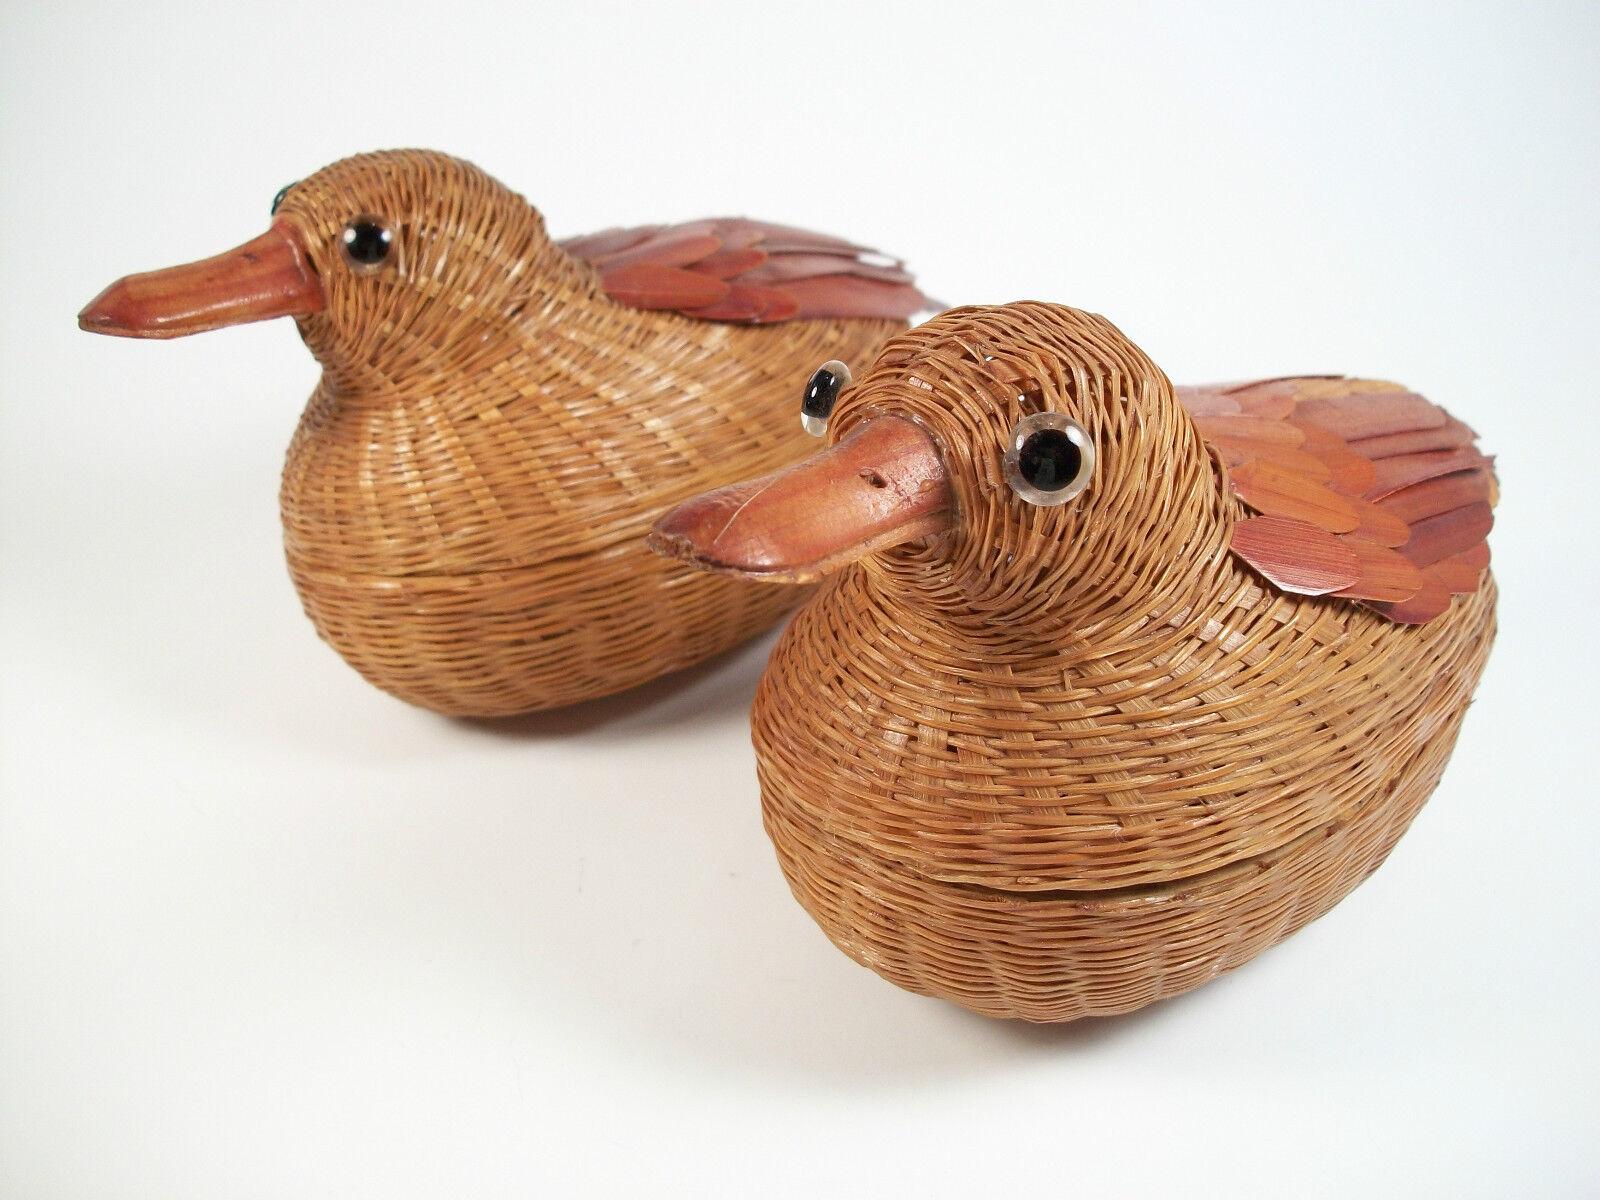 Vintage - finely woven - pair of bird form lidded baskets - articulated feathers, beaks and eyes - possibly Indonesian - mid/late 20th century.

Excellent vintage condition - no loss - no damage - no repairs.

Size of each - 6 1/2